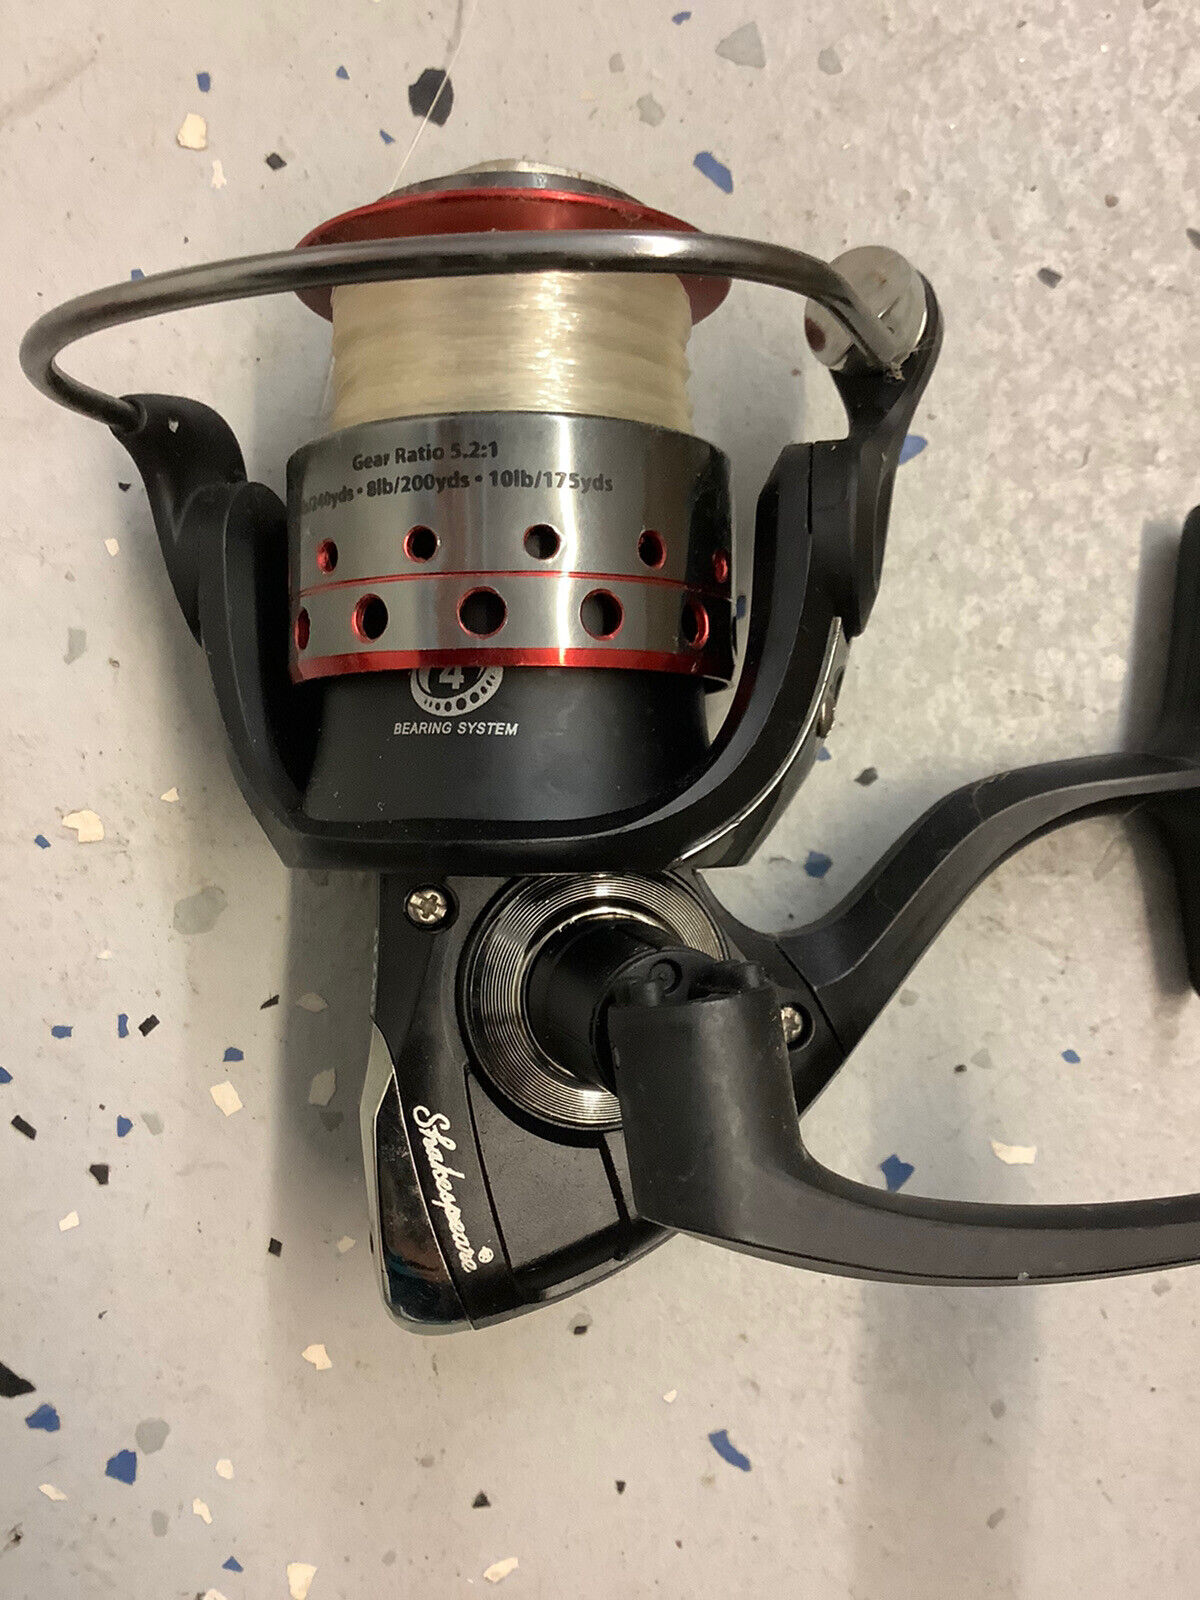 Shakespeare GX235 Spinning Reel (5.2:1) 4 Bearing System- Used